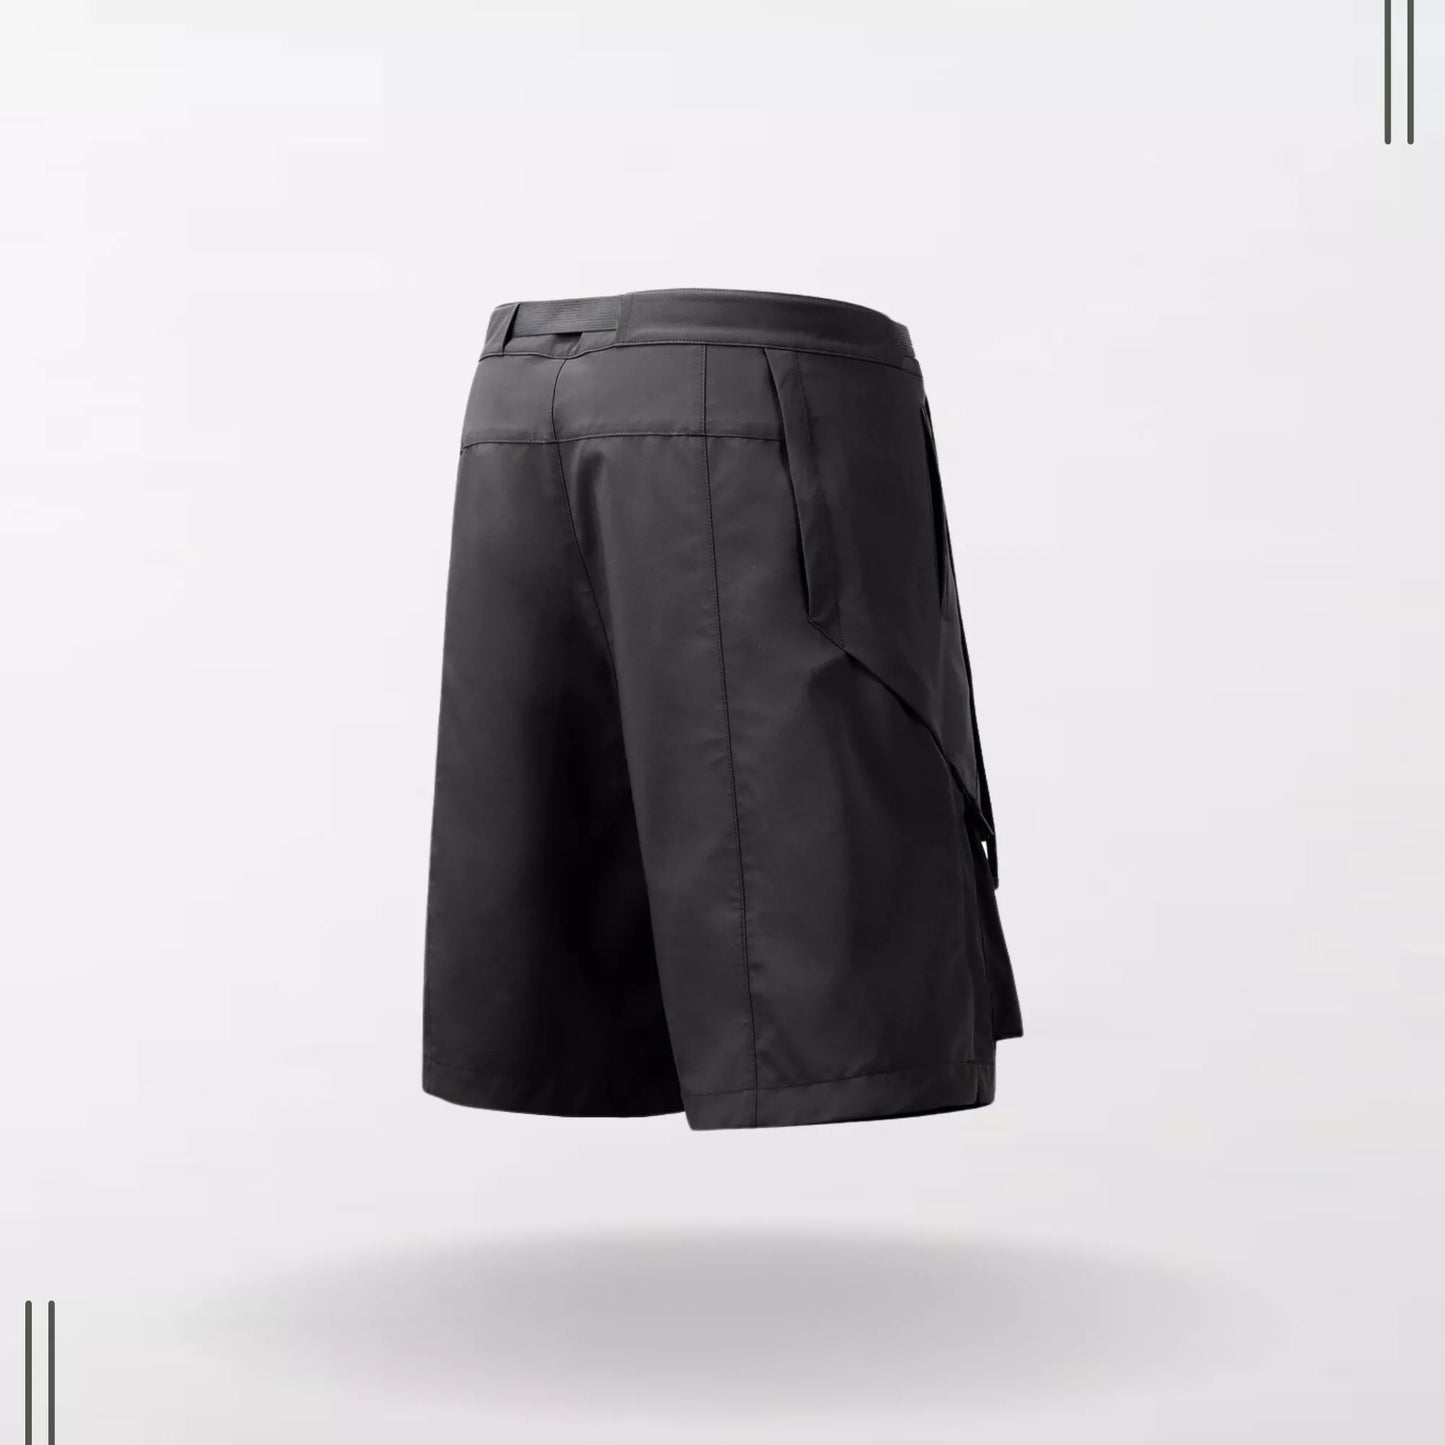 3D Curved Waterproof Summer Techwear Shorts By Clotechnow